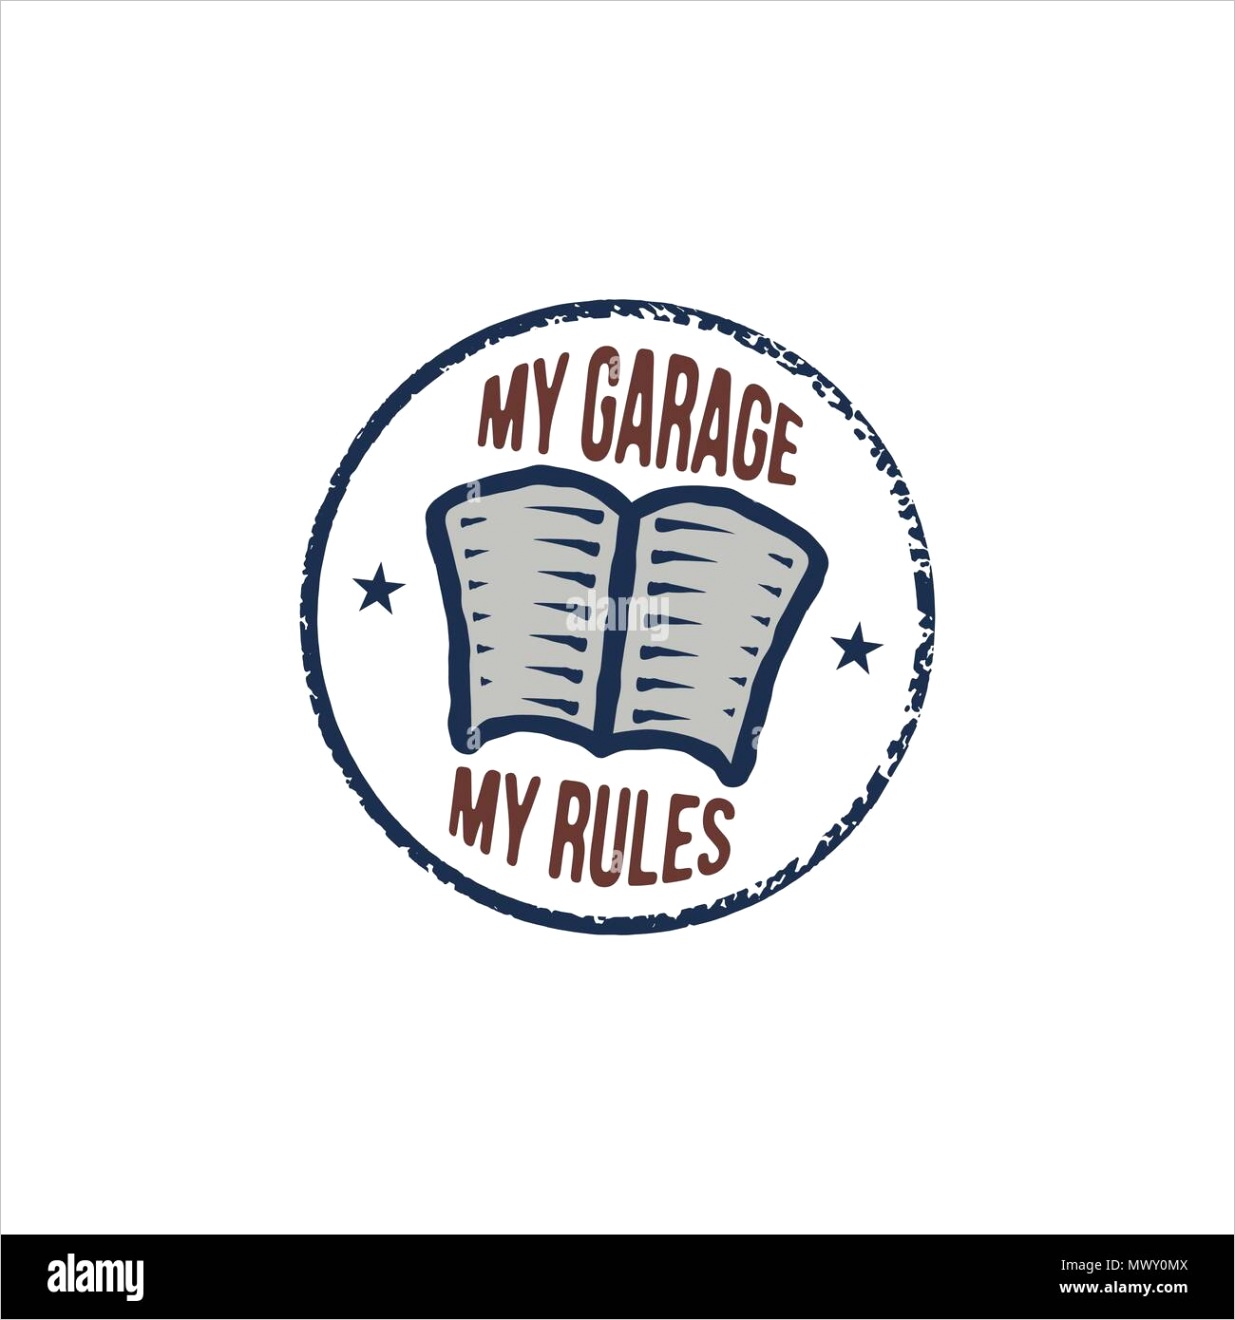 vintage hand drawn funny concept retro poster design for auto mechanic my garage my rules quote stock vector isolated on white background image ml